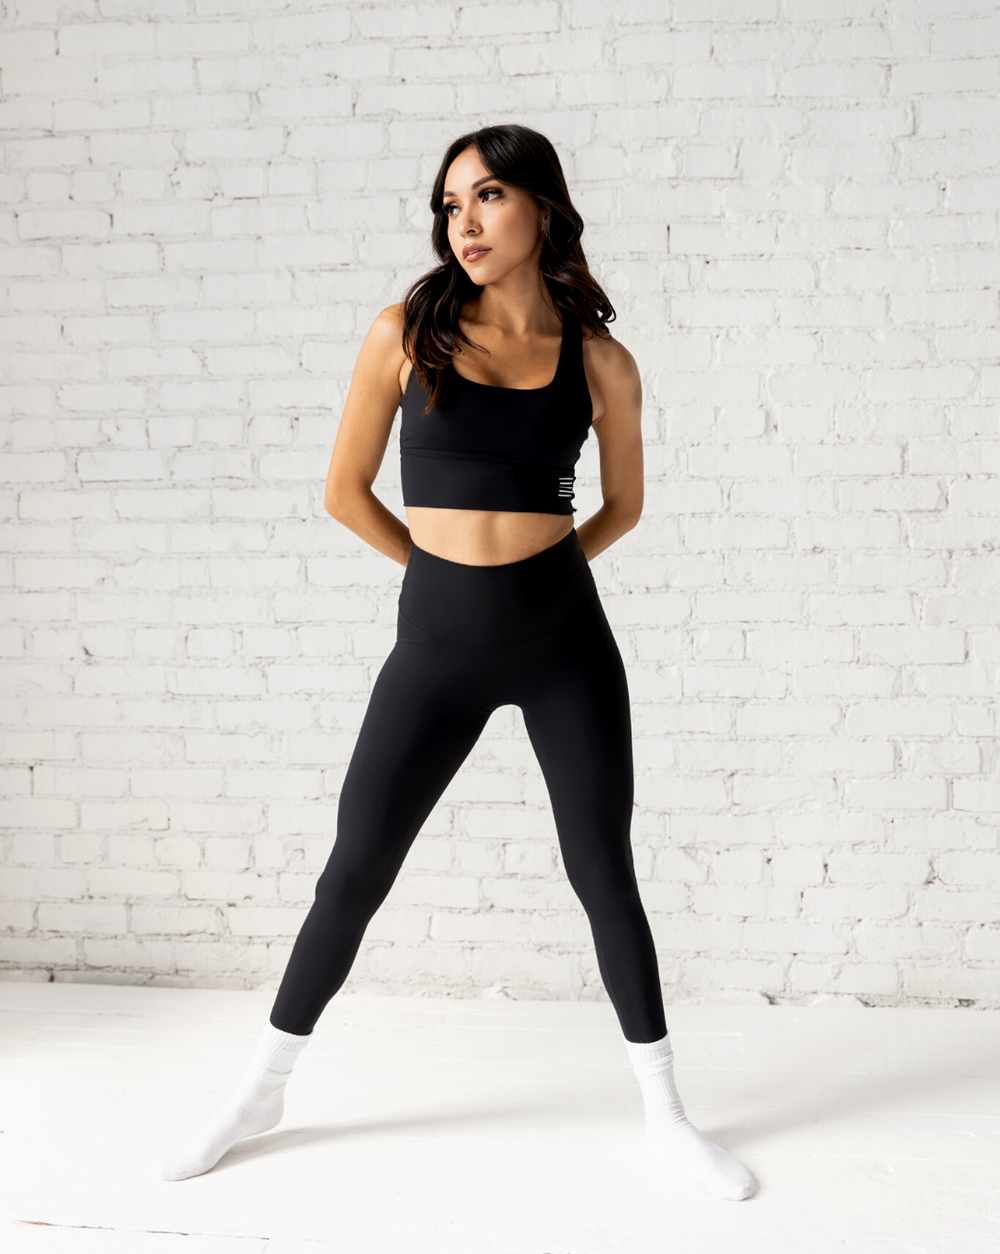 Trendy and coordinated black fitness clothing